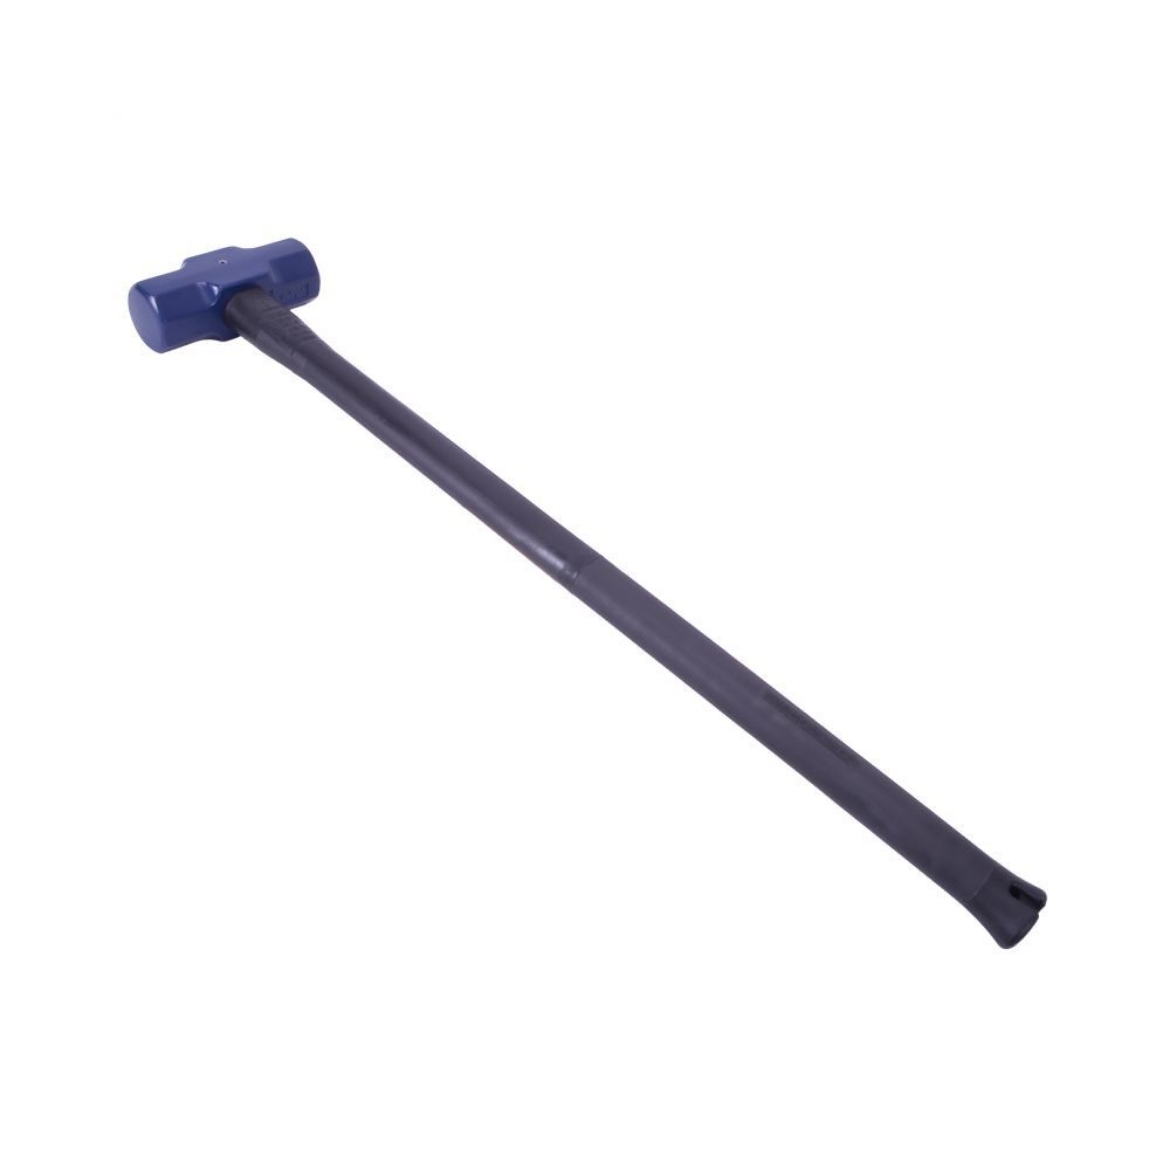 Picture of Sledge Hammer 4lb/1.8kg, Pinned Steel Core Fibreglass Handle 600mm